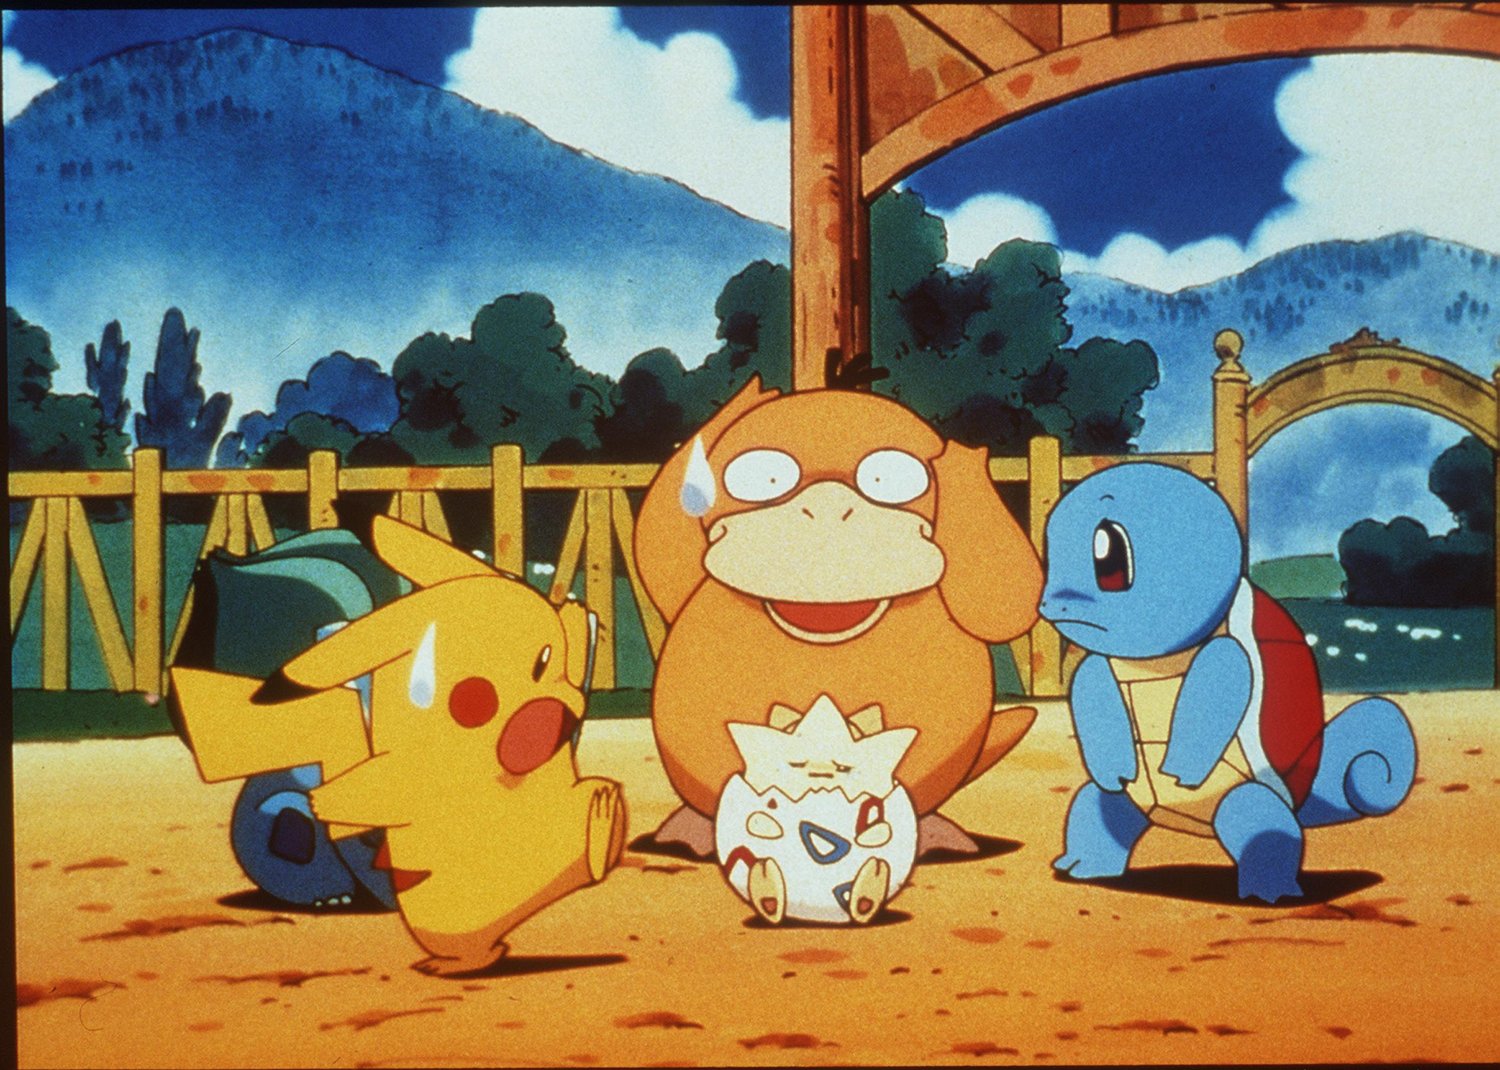 Pikachu, Psyduck, Togepi, and Squirtle 1999's Pokemon: The First Movie